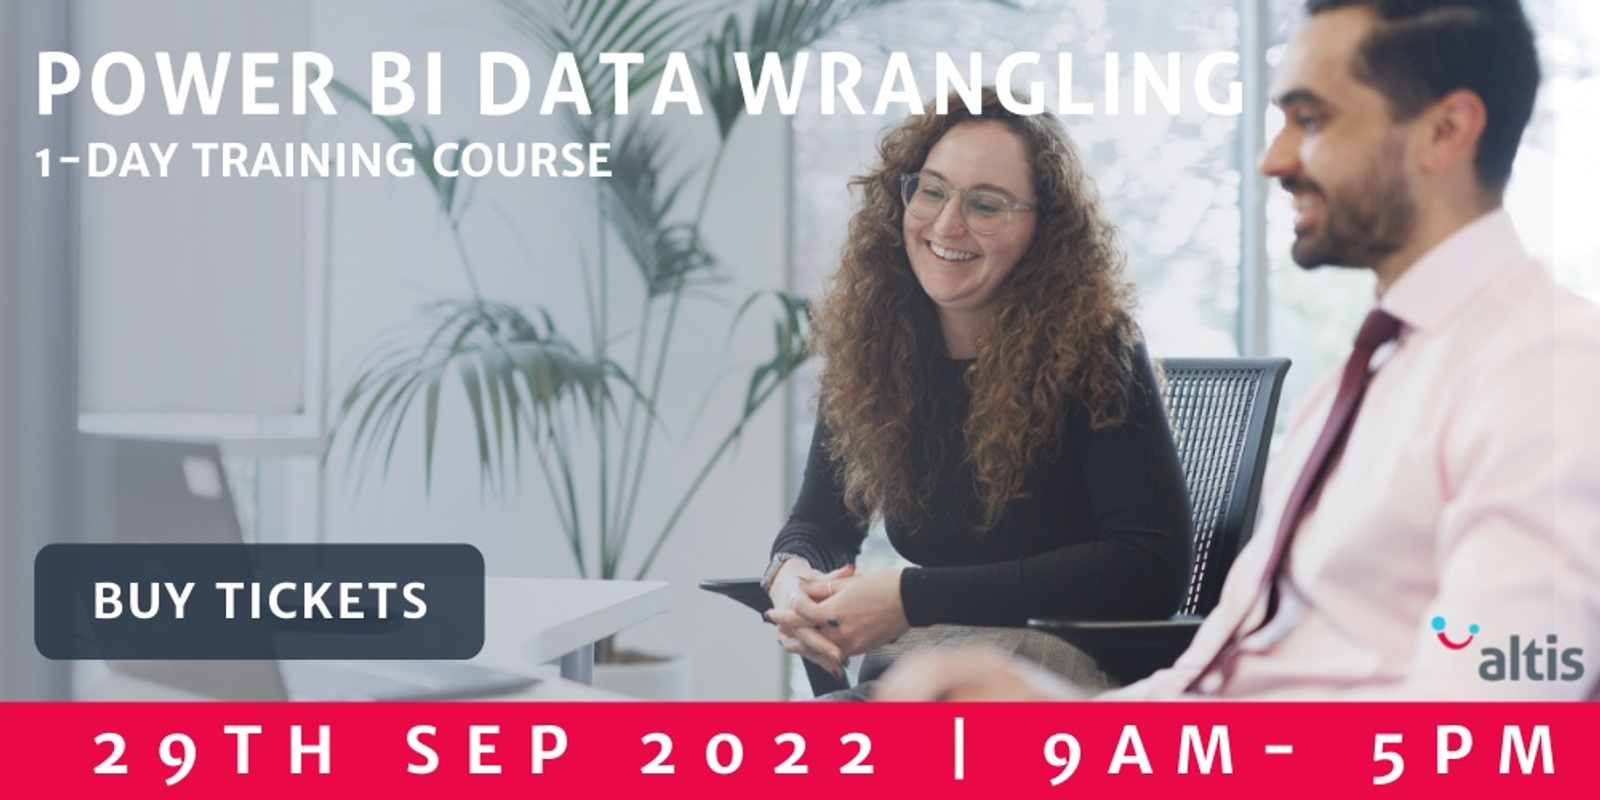 Banner image for Power BI Data Wrangling with Altis Consulting - September 2022